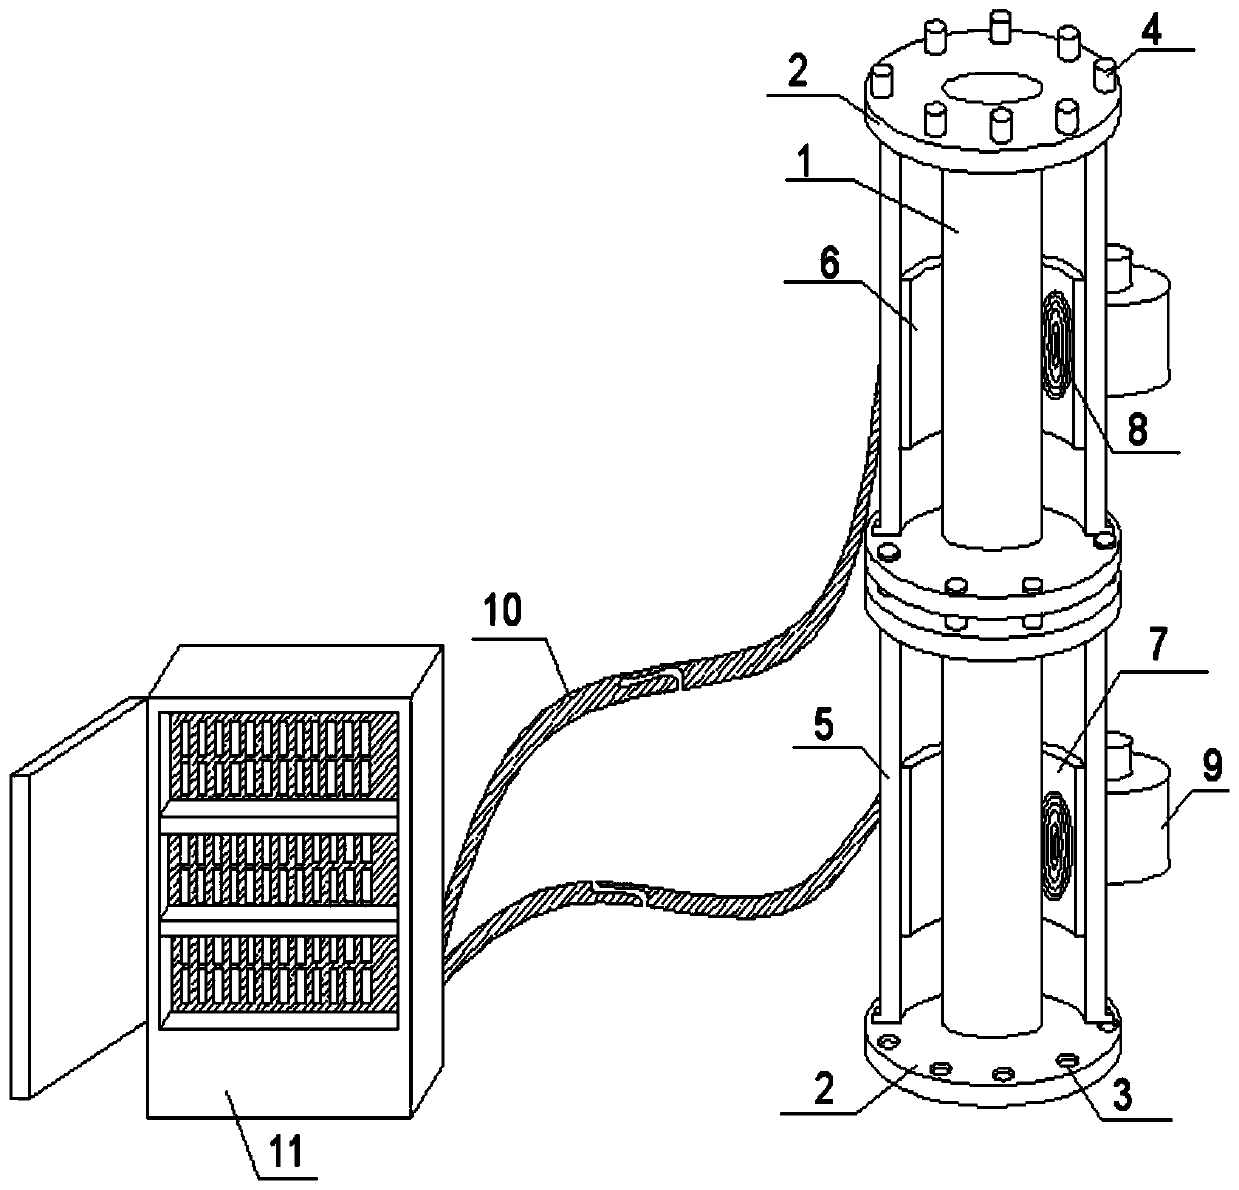 Liquefied natural gas gasification assembly device